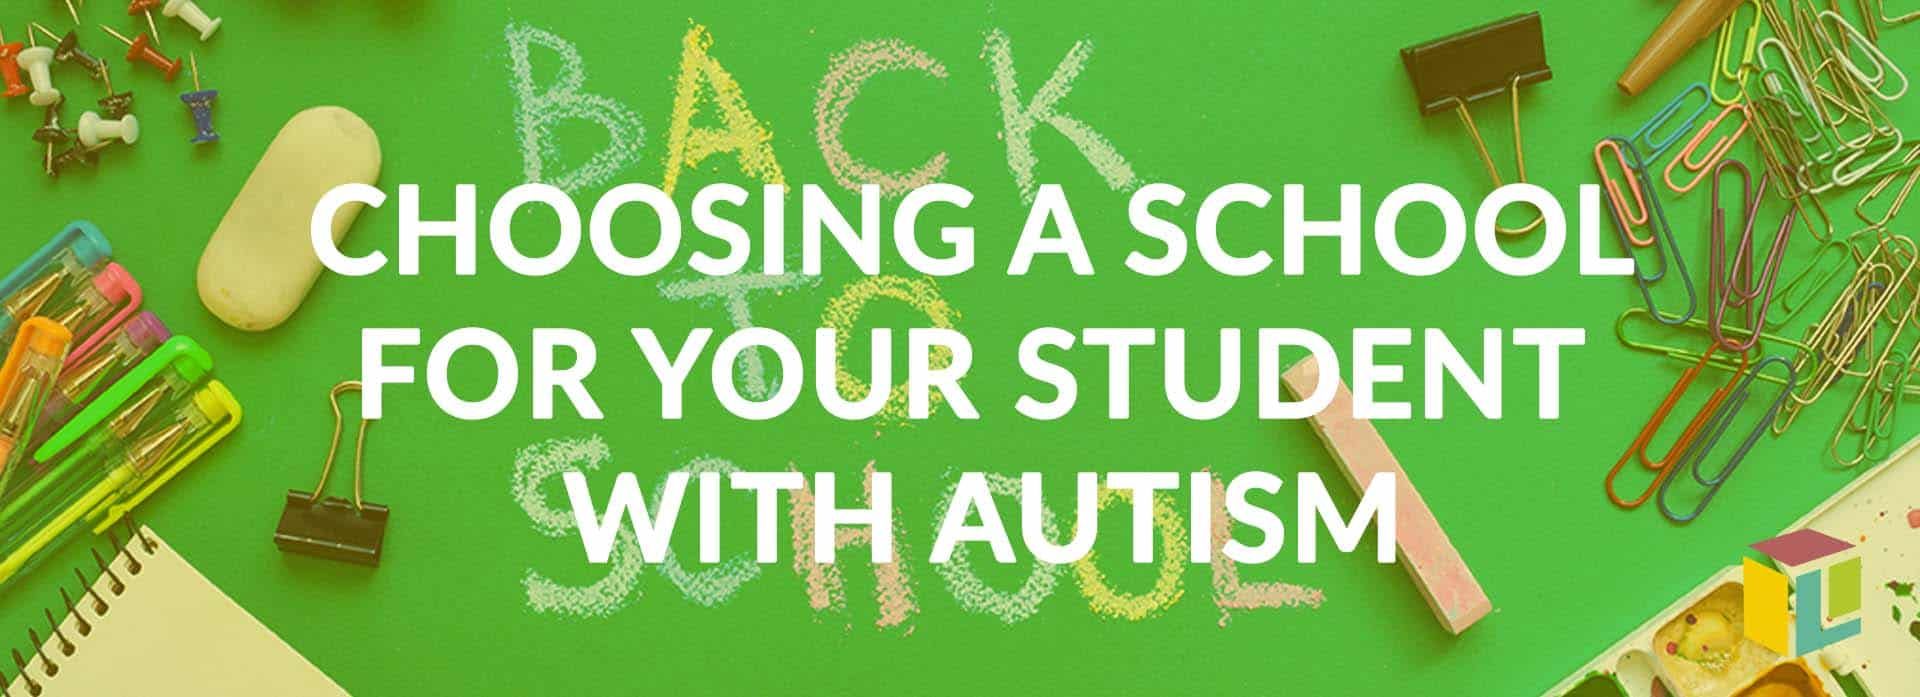 Choosing A School For Your Student With Autism Choosing A School For Your Student With Autism Choosing A School For Your Student With Autism Choosing A School For Your Student With Autism